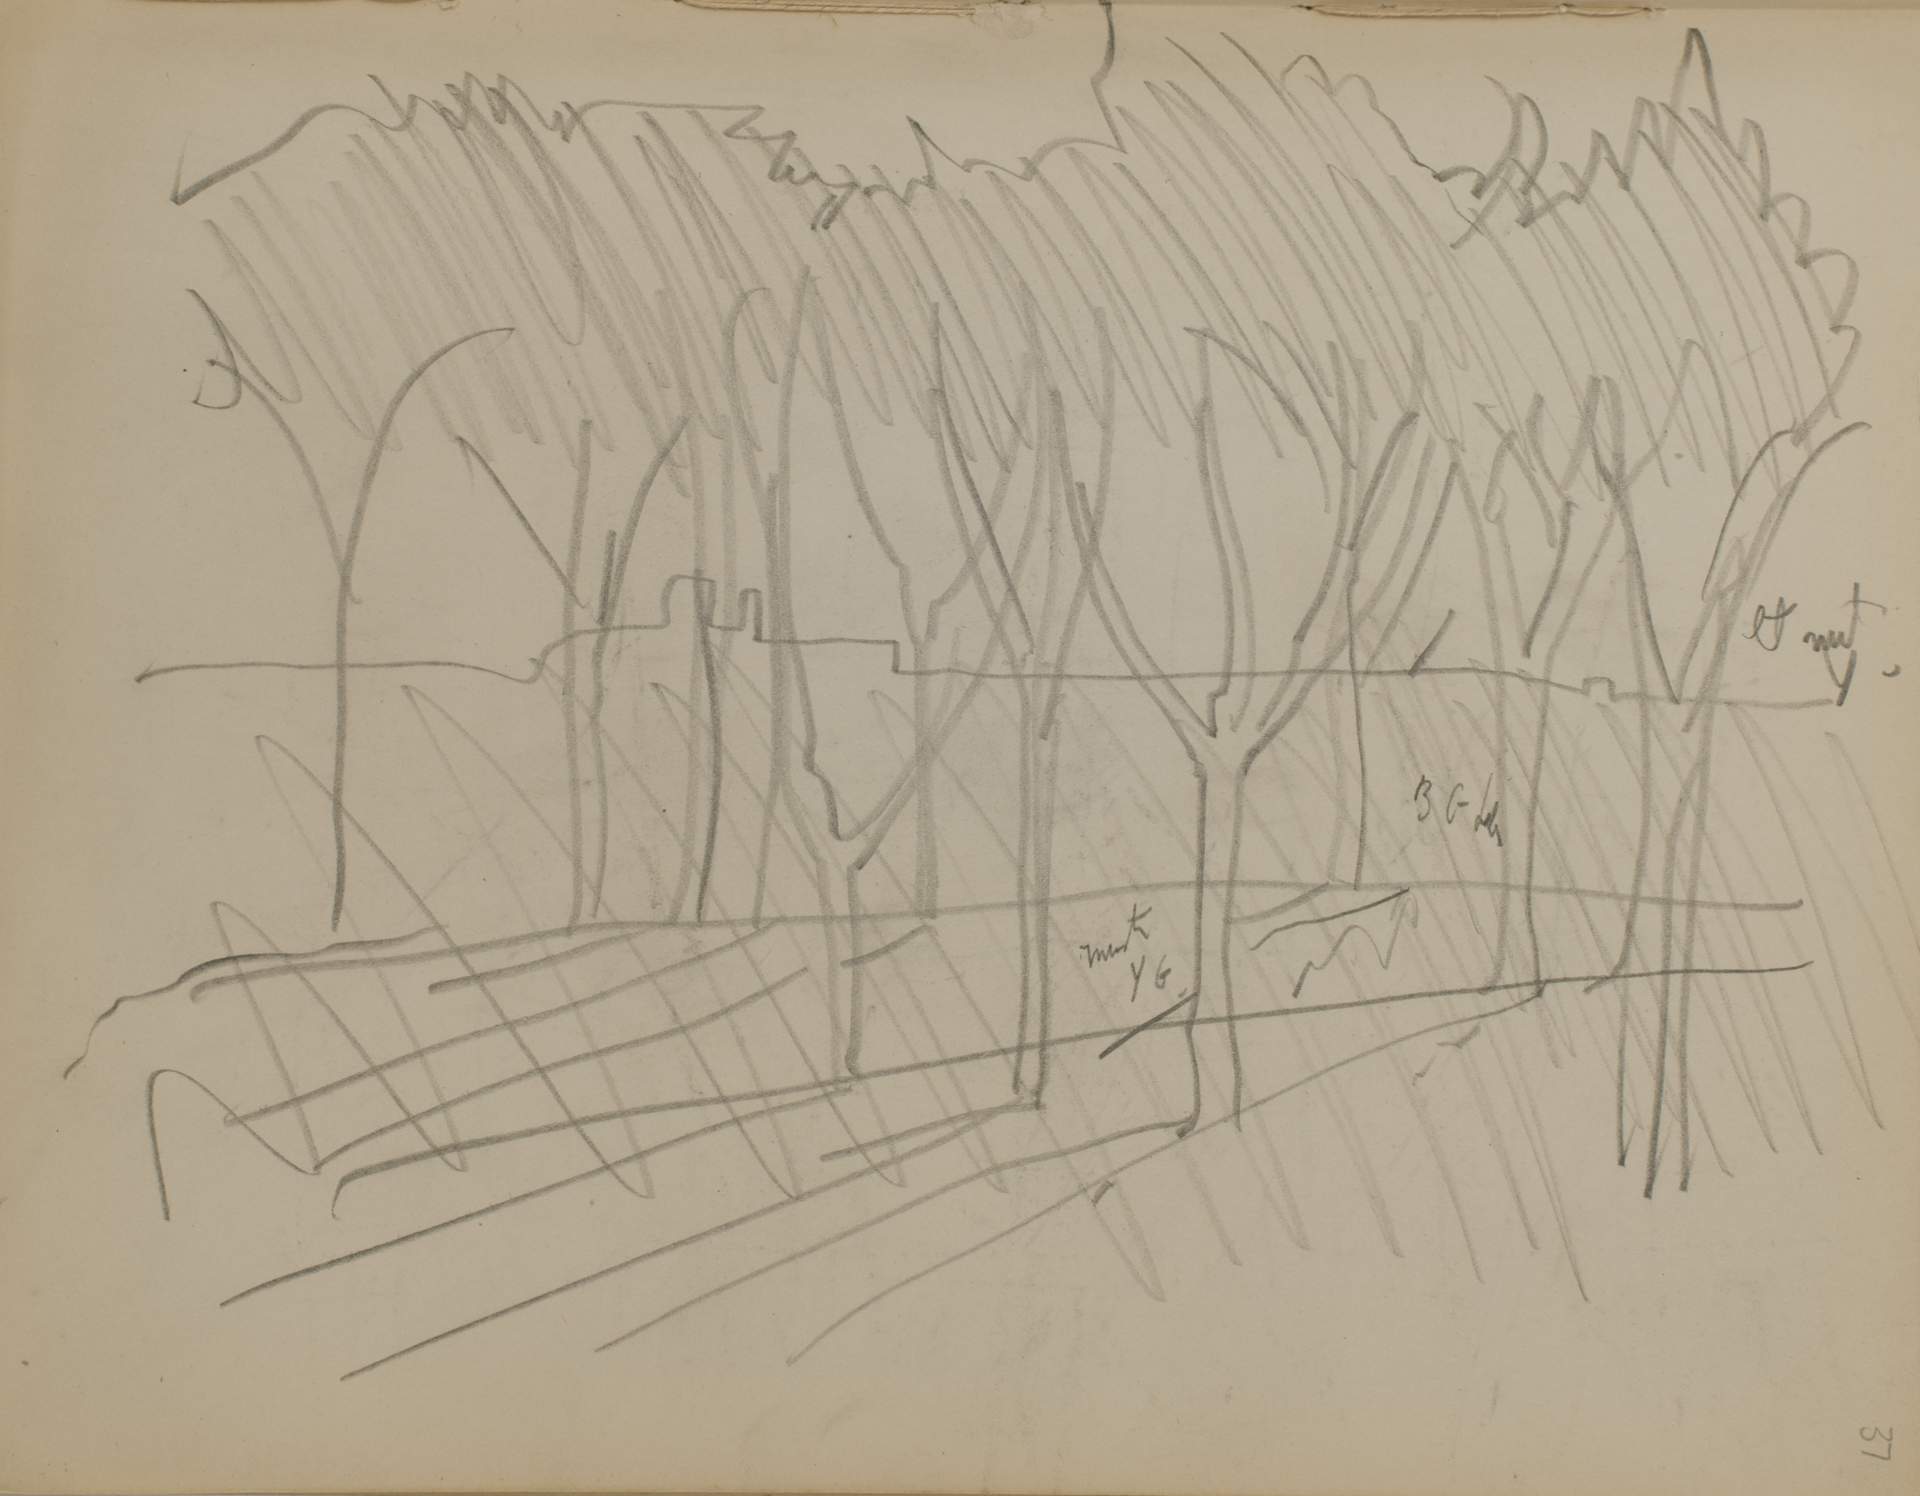 Untitled (landscape with trees, path, and city silhouette)